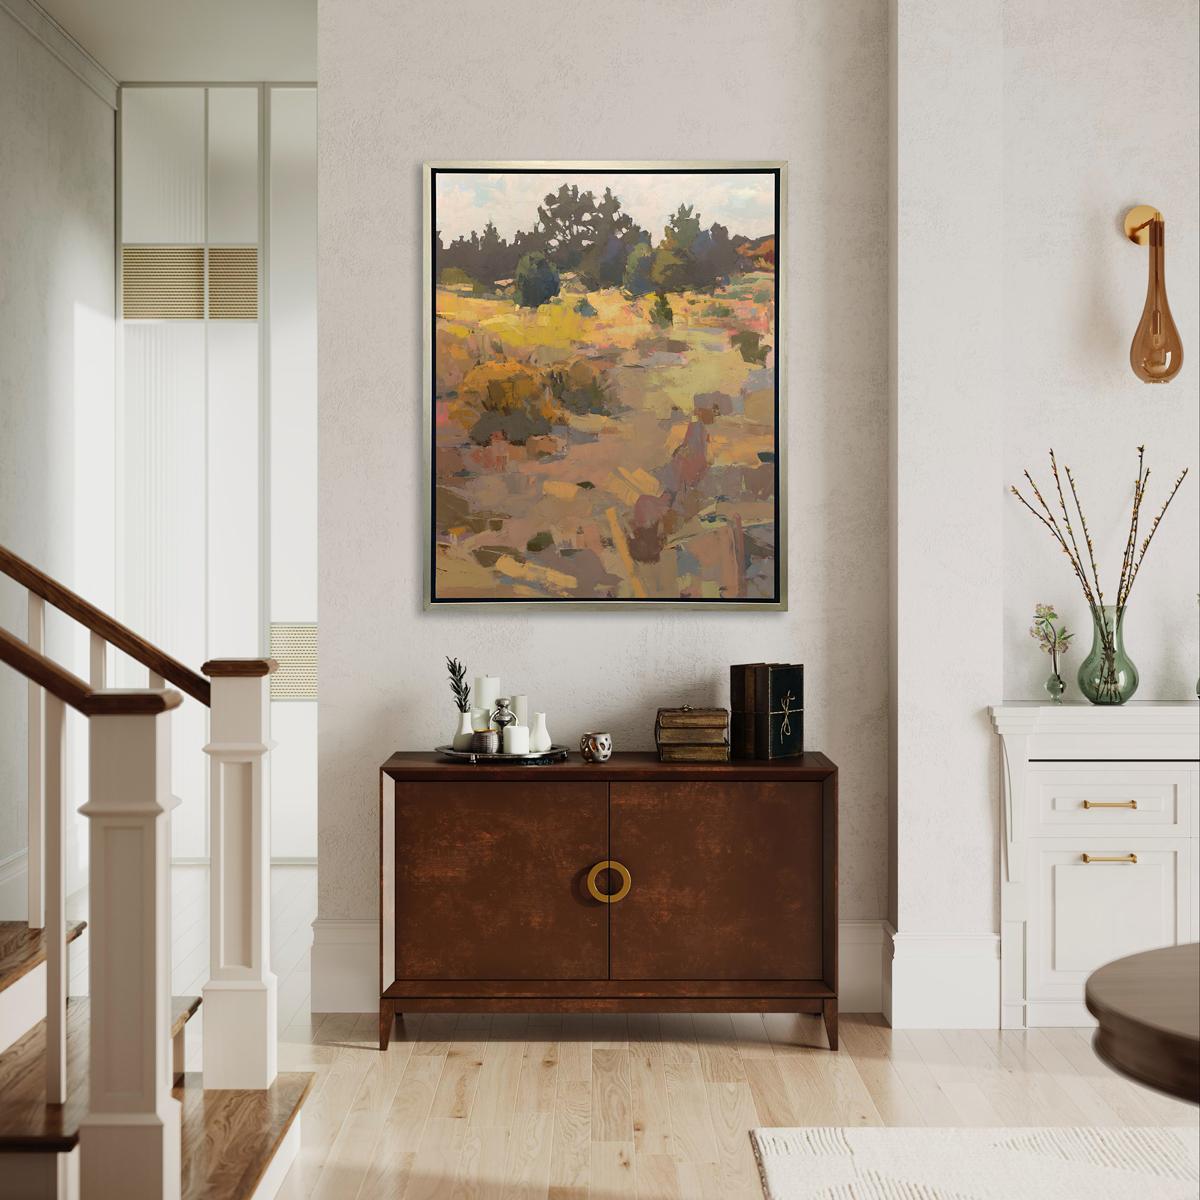 This Limited Edition giclee landscape print by Bri Custer is an edition size of 195. It features a warm, earth-toned palette. Printed on canvas, this giclee ships framed in a warm silver floater frame wired and ready to hang. Other floater frame